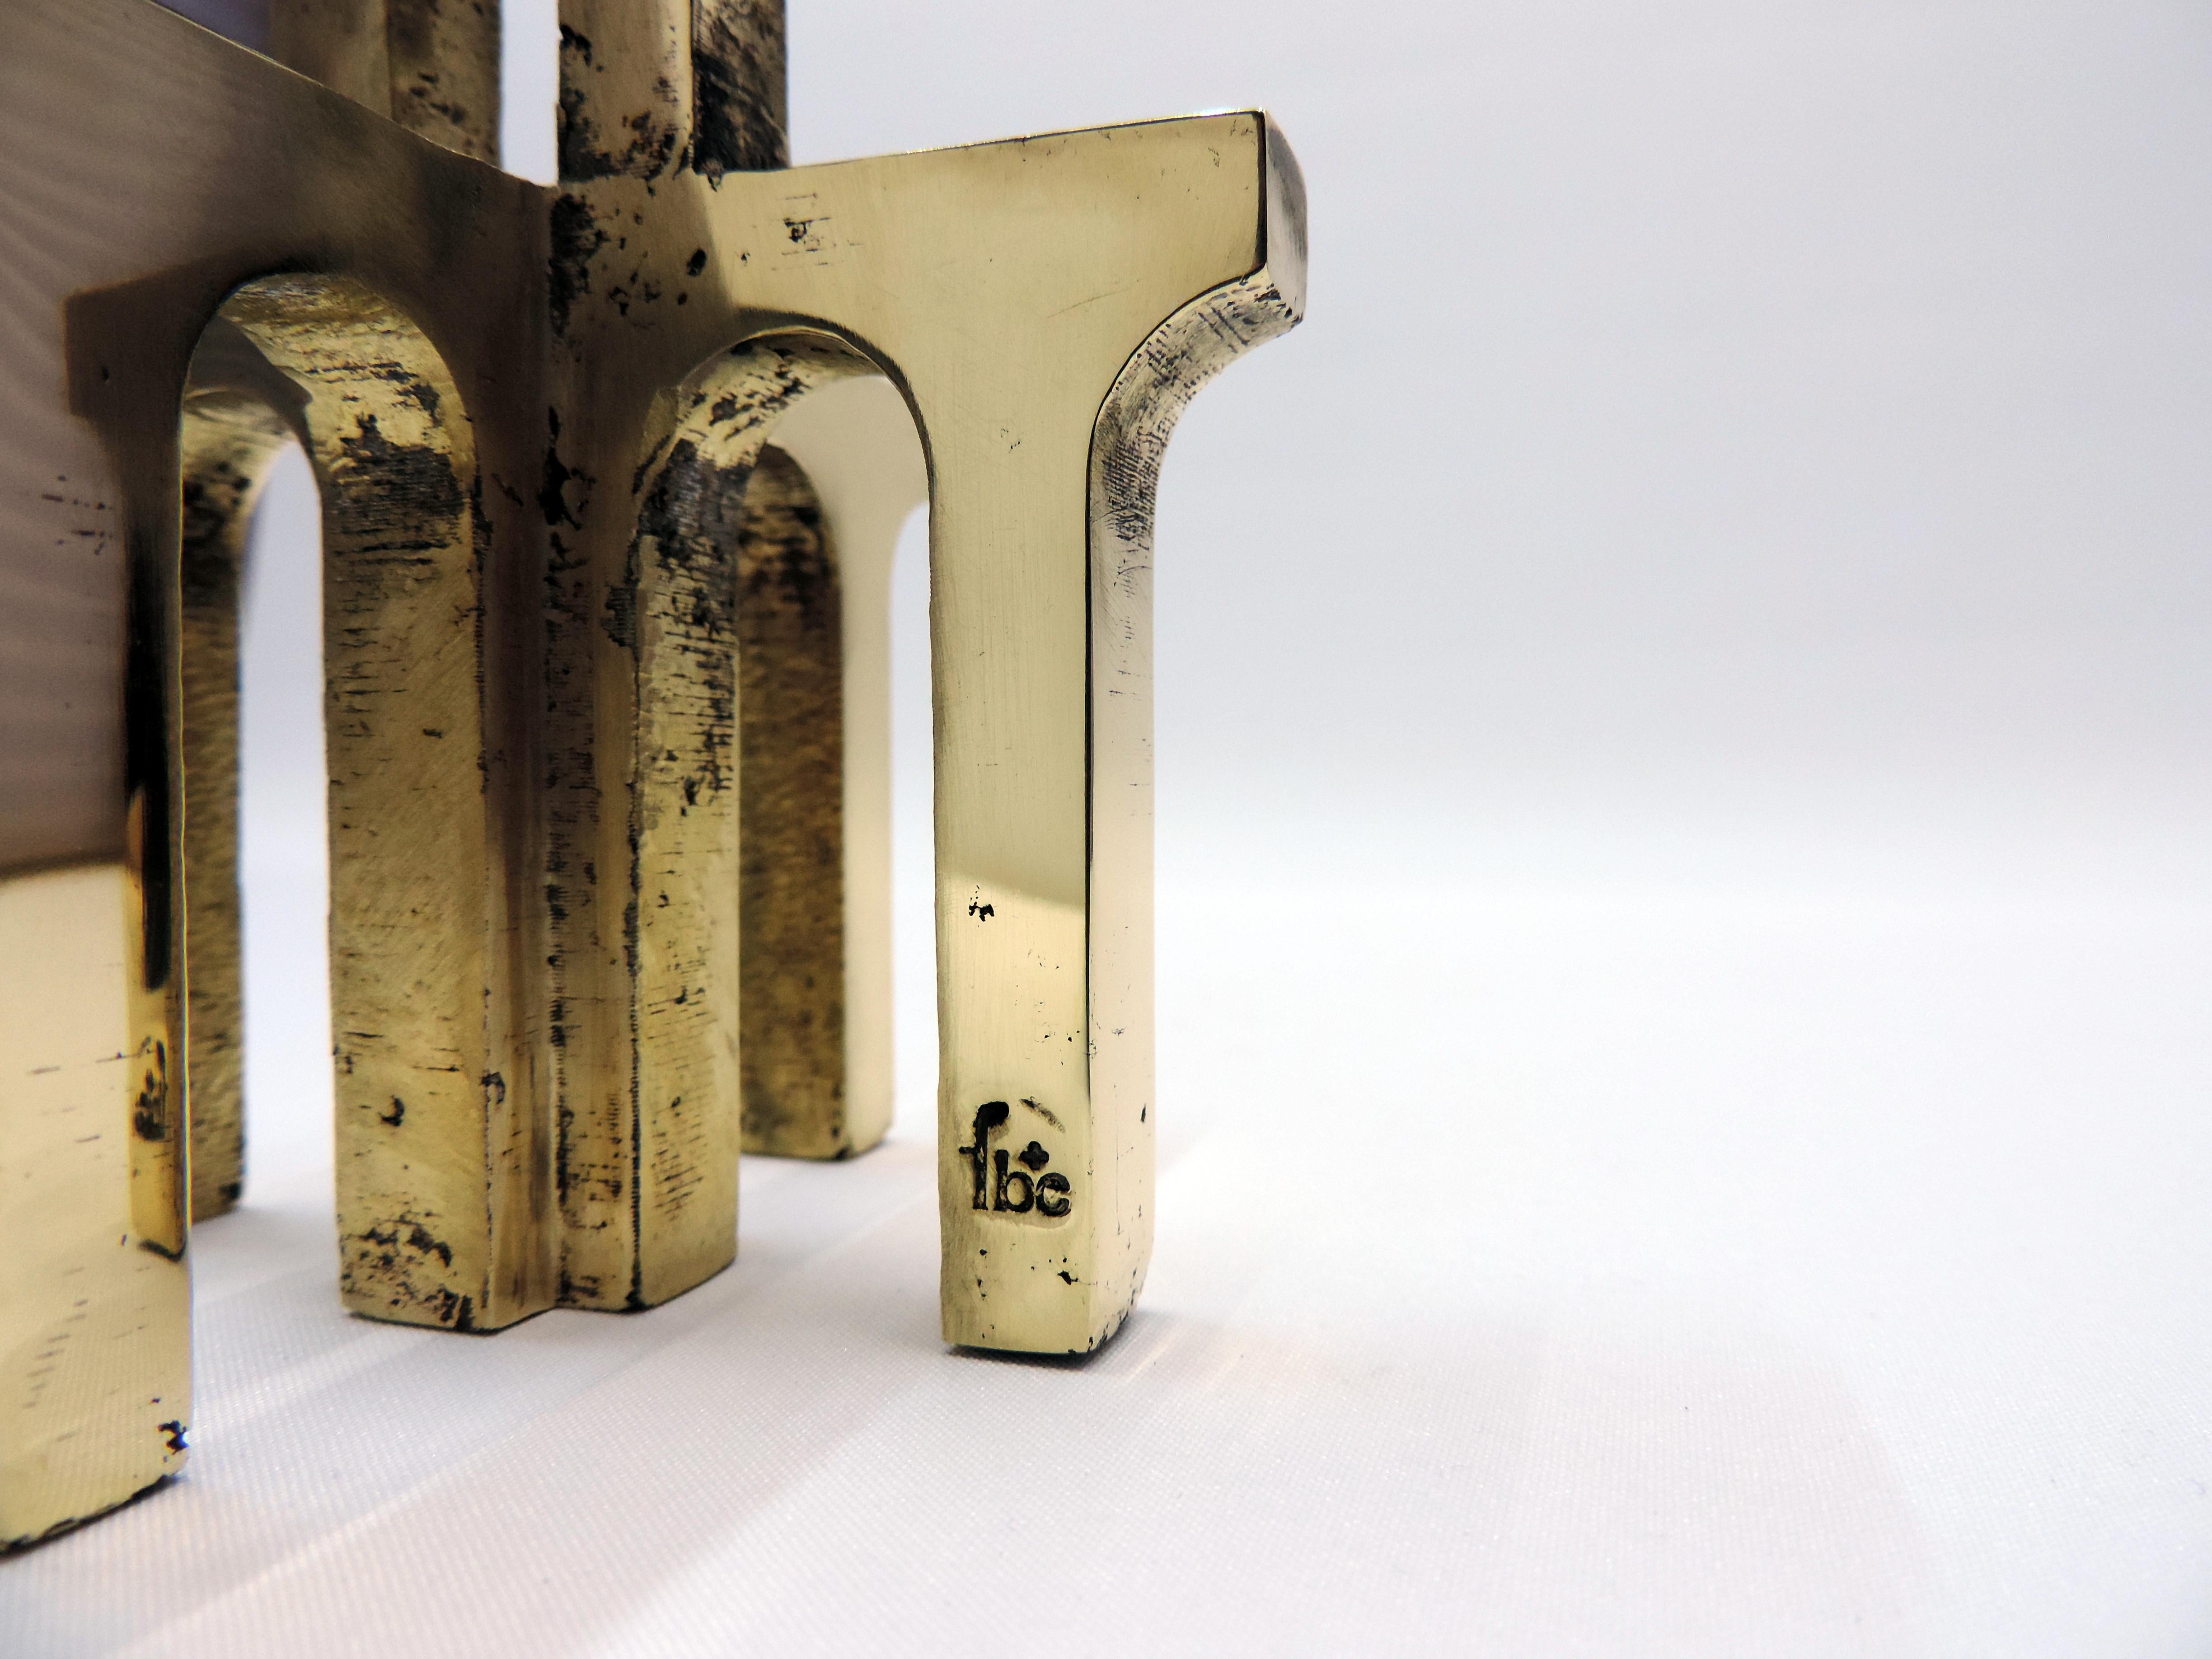 ARCHE is a beautiful massive bronze candle holder exploration by Fabien Barrero-Carsenat in his studio. The bronze alloy was custom made into his own foundry, from copper, zinc and pewter, providing to each sample their own uniqueness, identity.